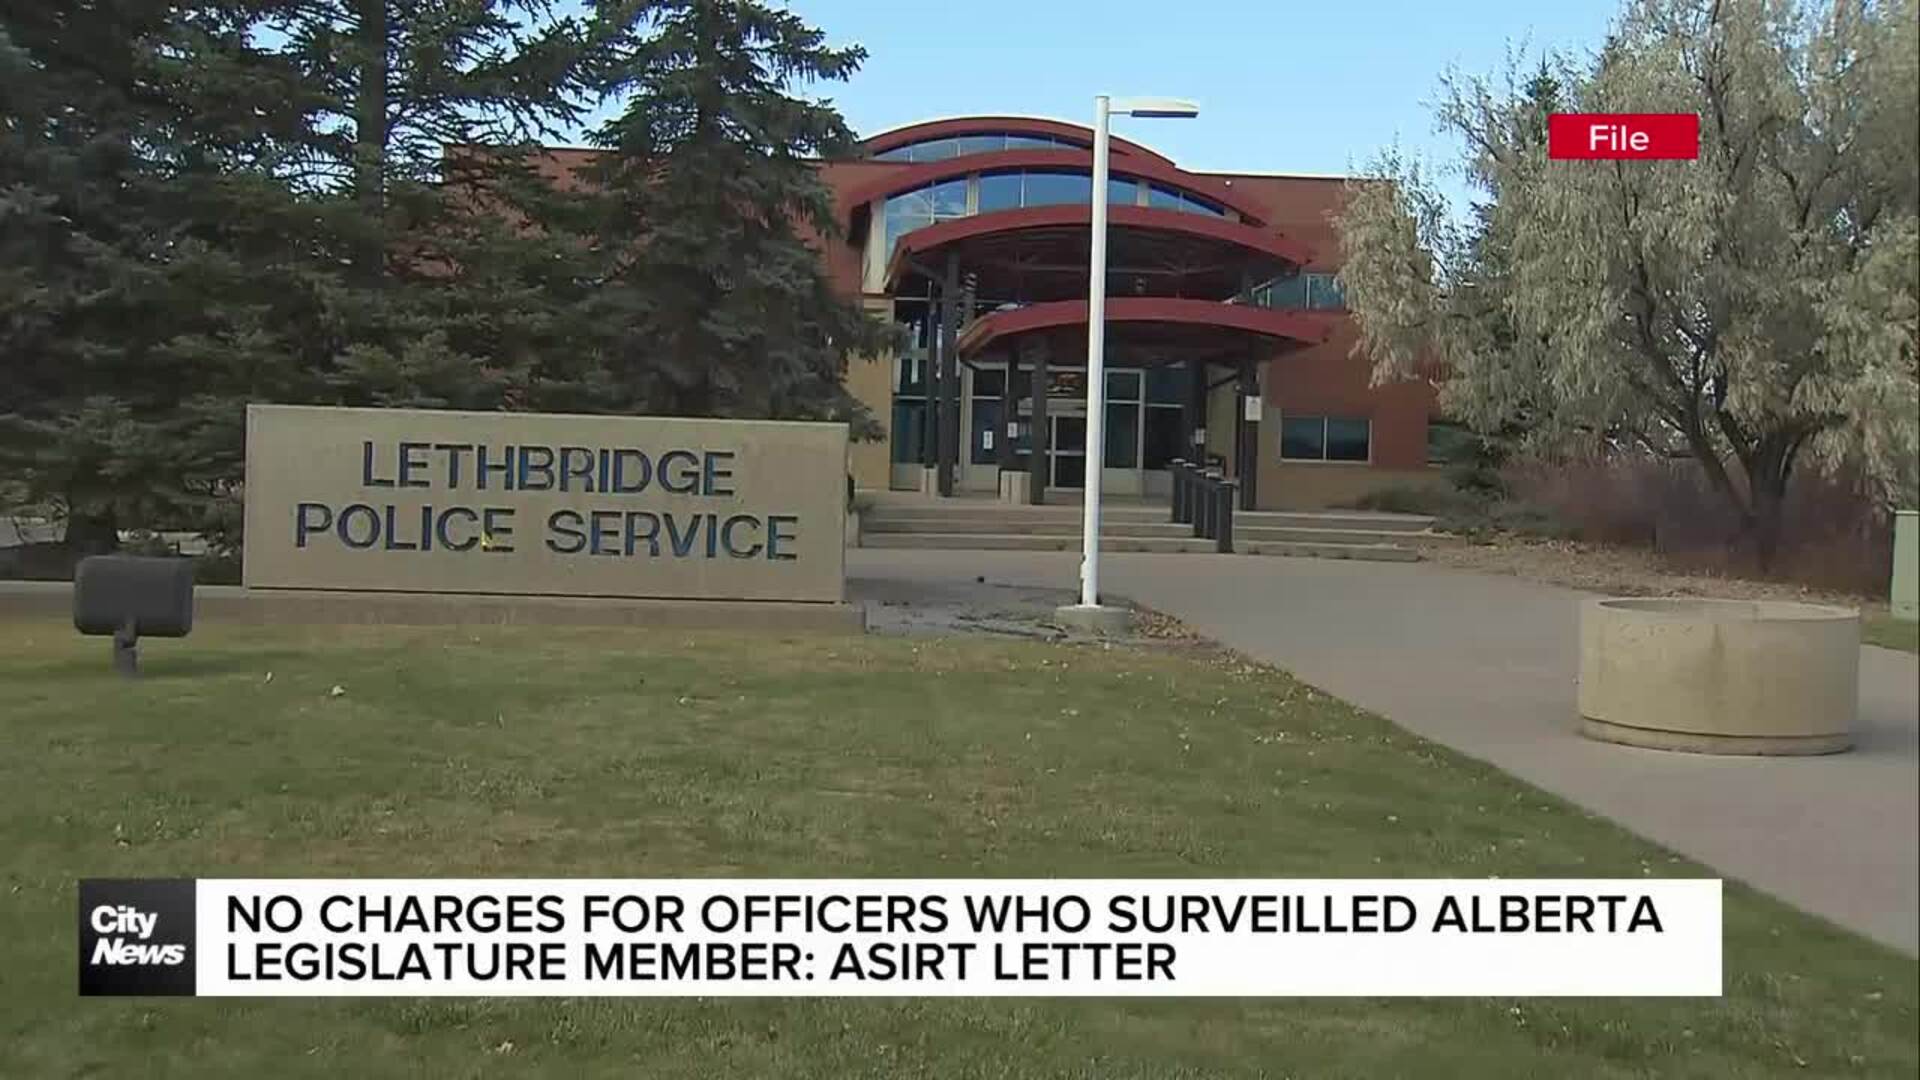 No charges for officers who surveilled Alberta legislature member: ASIRT letter